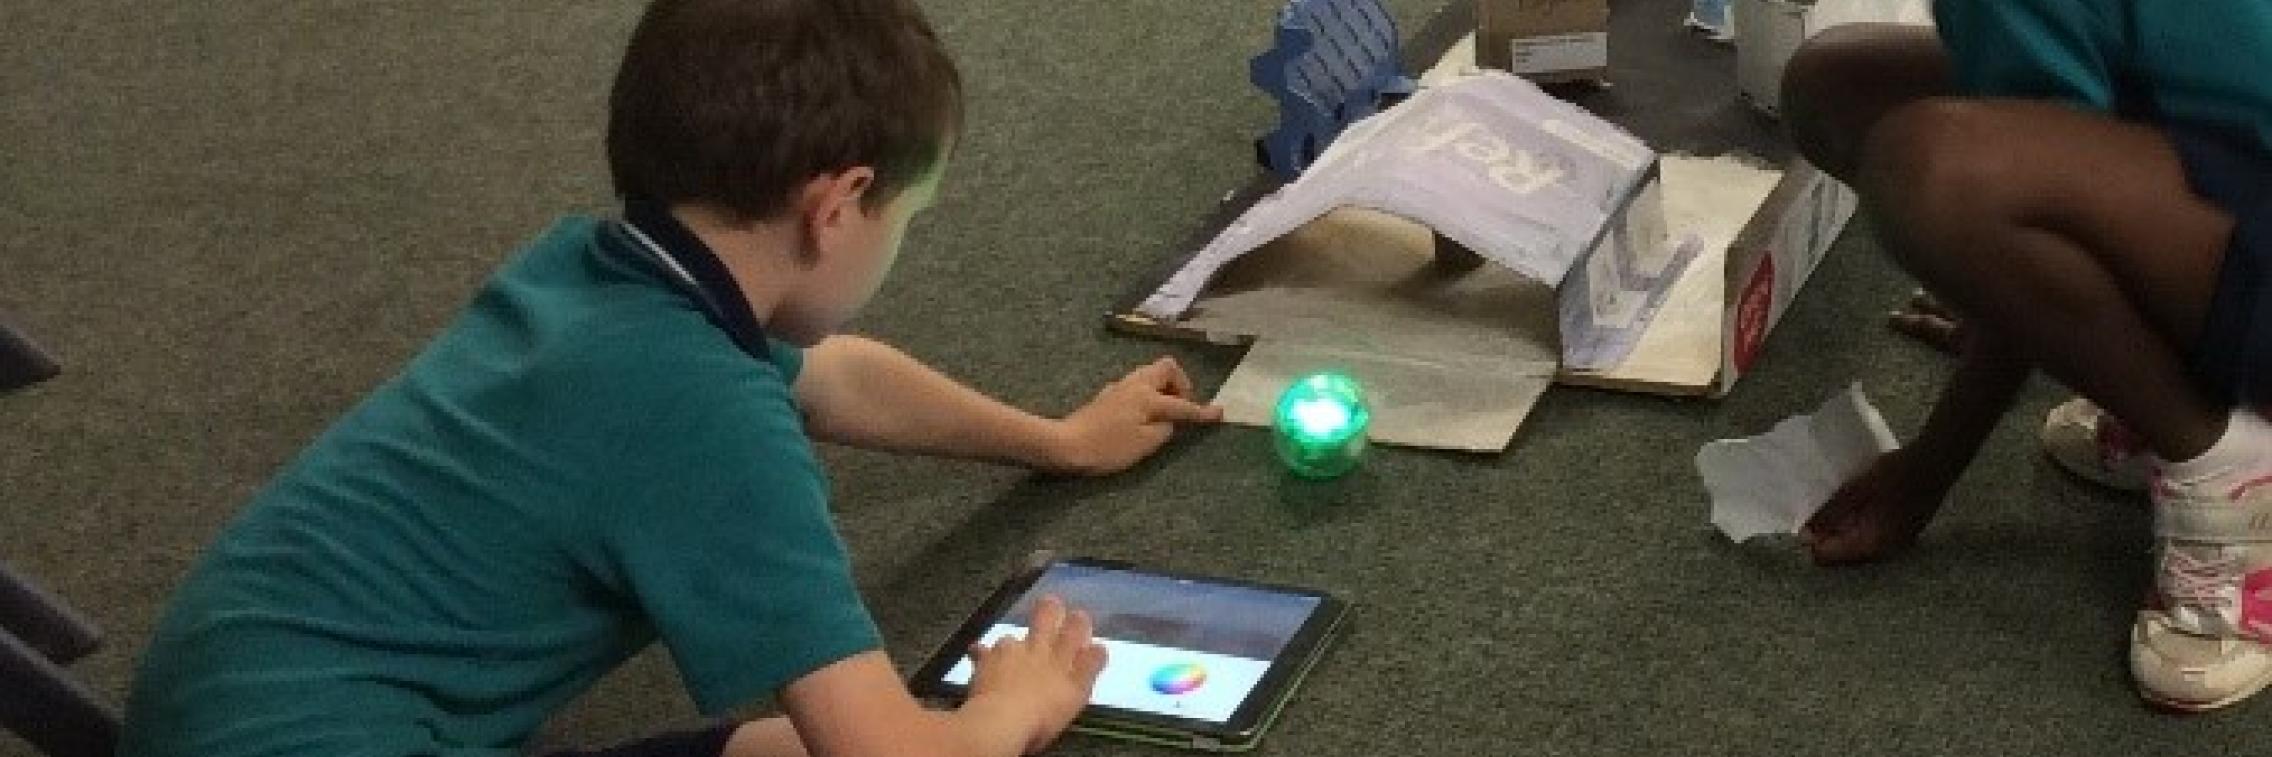 students using sphero on obstacle course